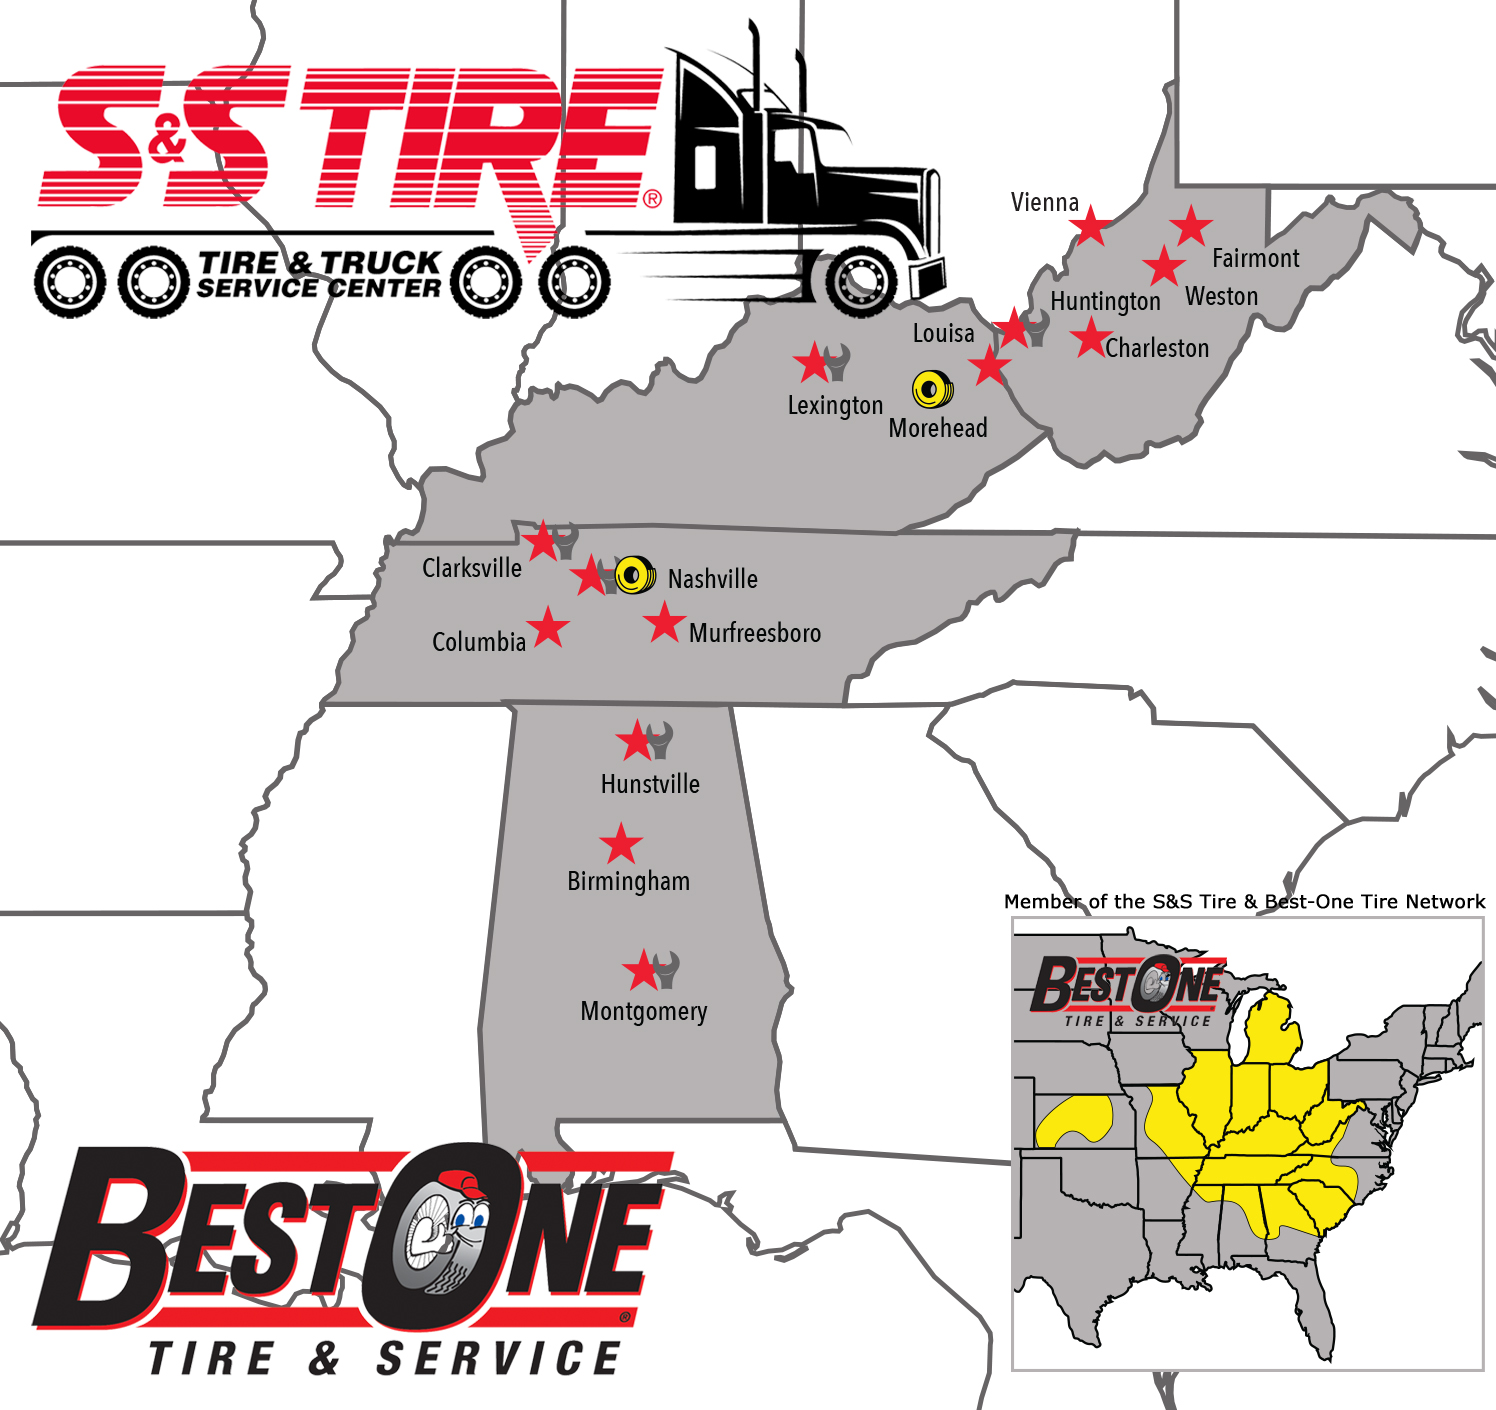 Updated S&S Tire and Best One location map